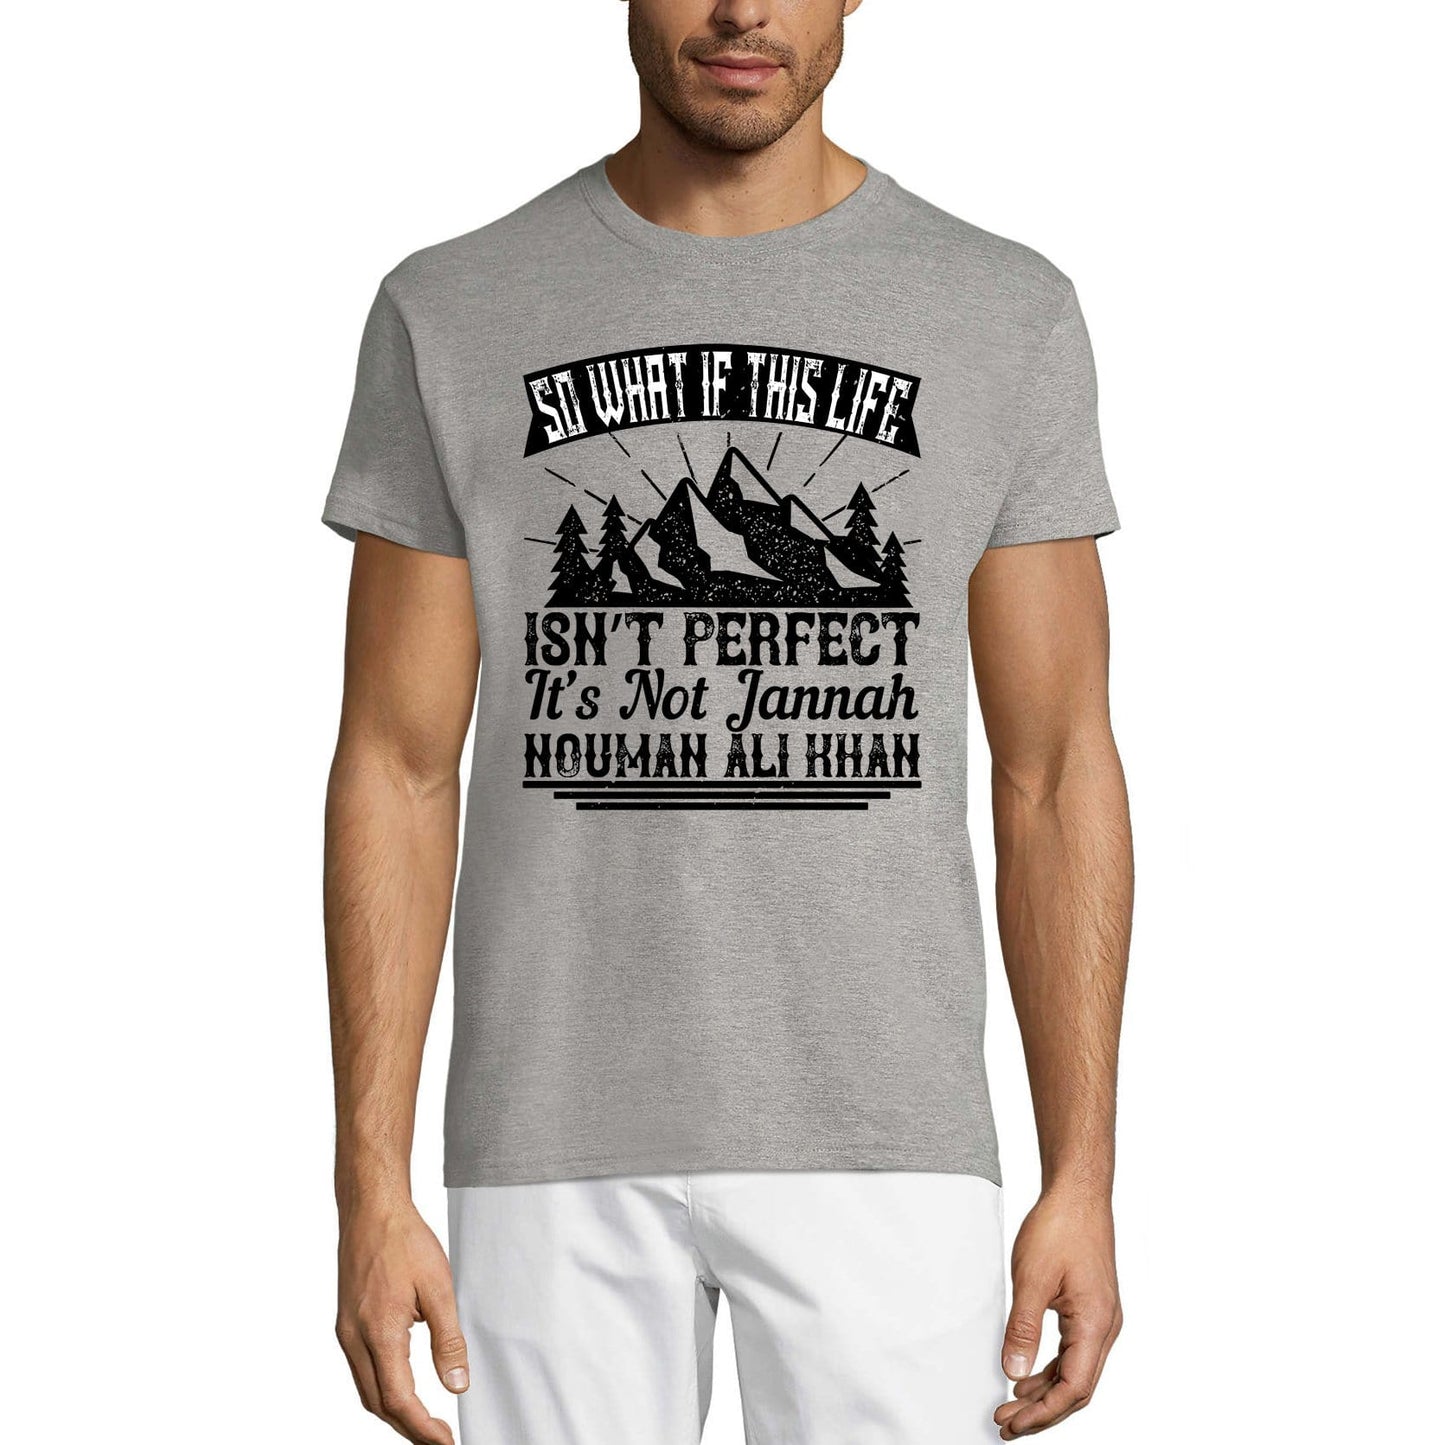 ULTRABASIC Herren T-Shirt So What If This Life isn't Perfect It's Not Jannah - Muslimisches T-Shirt